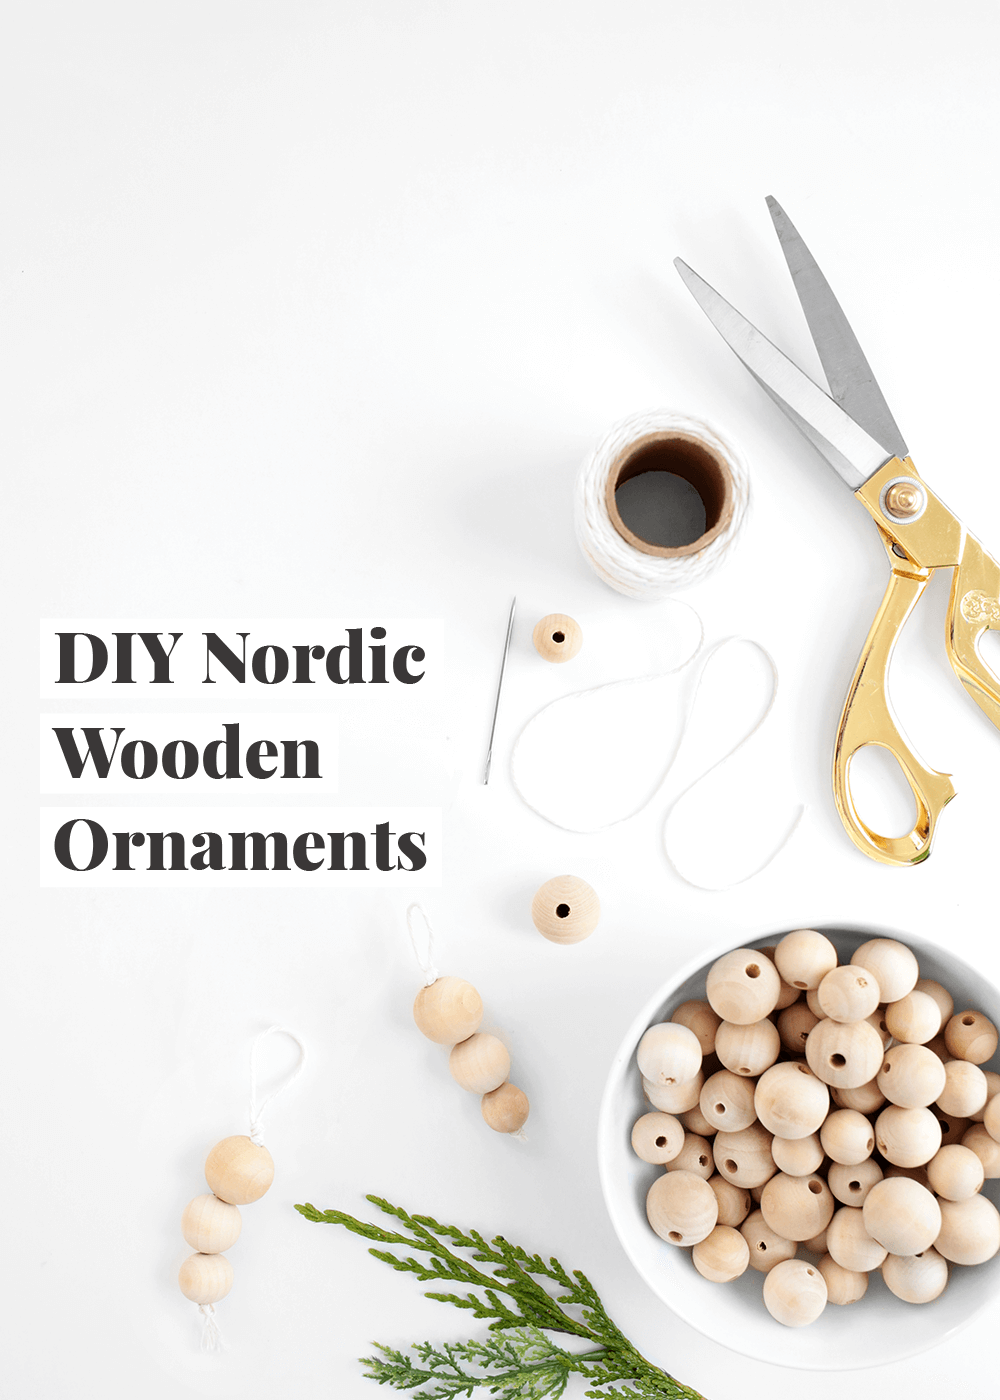 DIY Nordic Wooden Ornaments from The Faux Martha